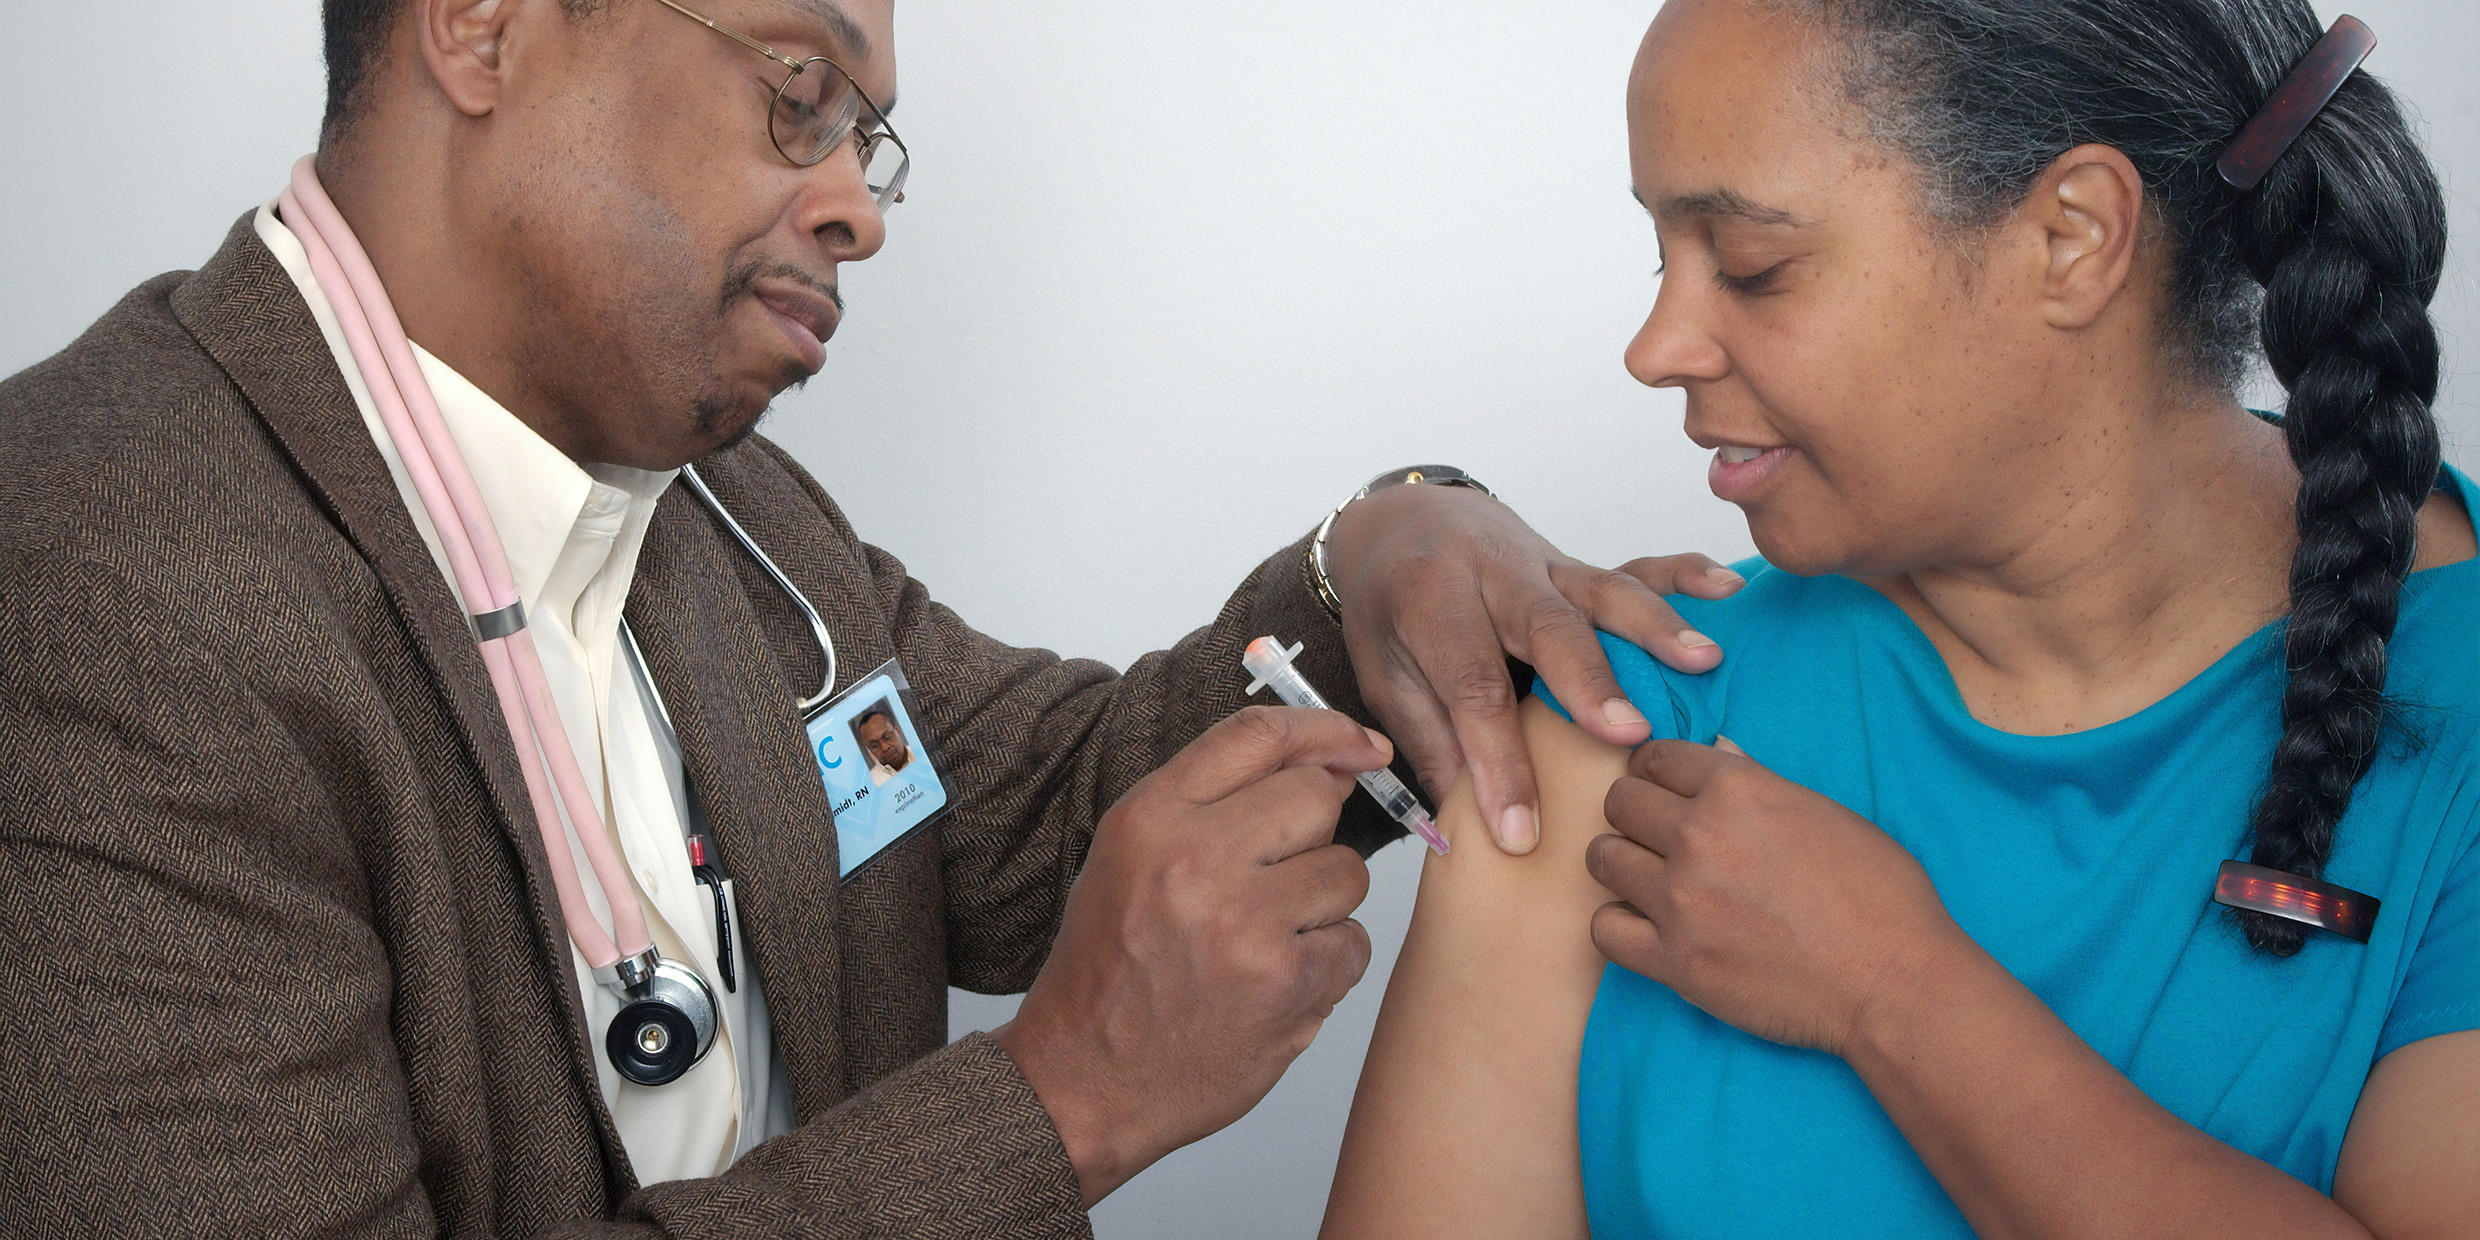 Image of a doctor administering an injection to a patient